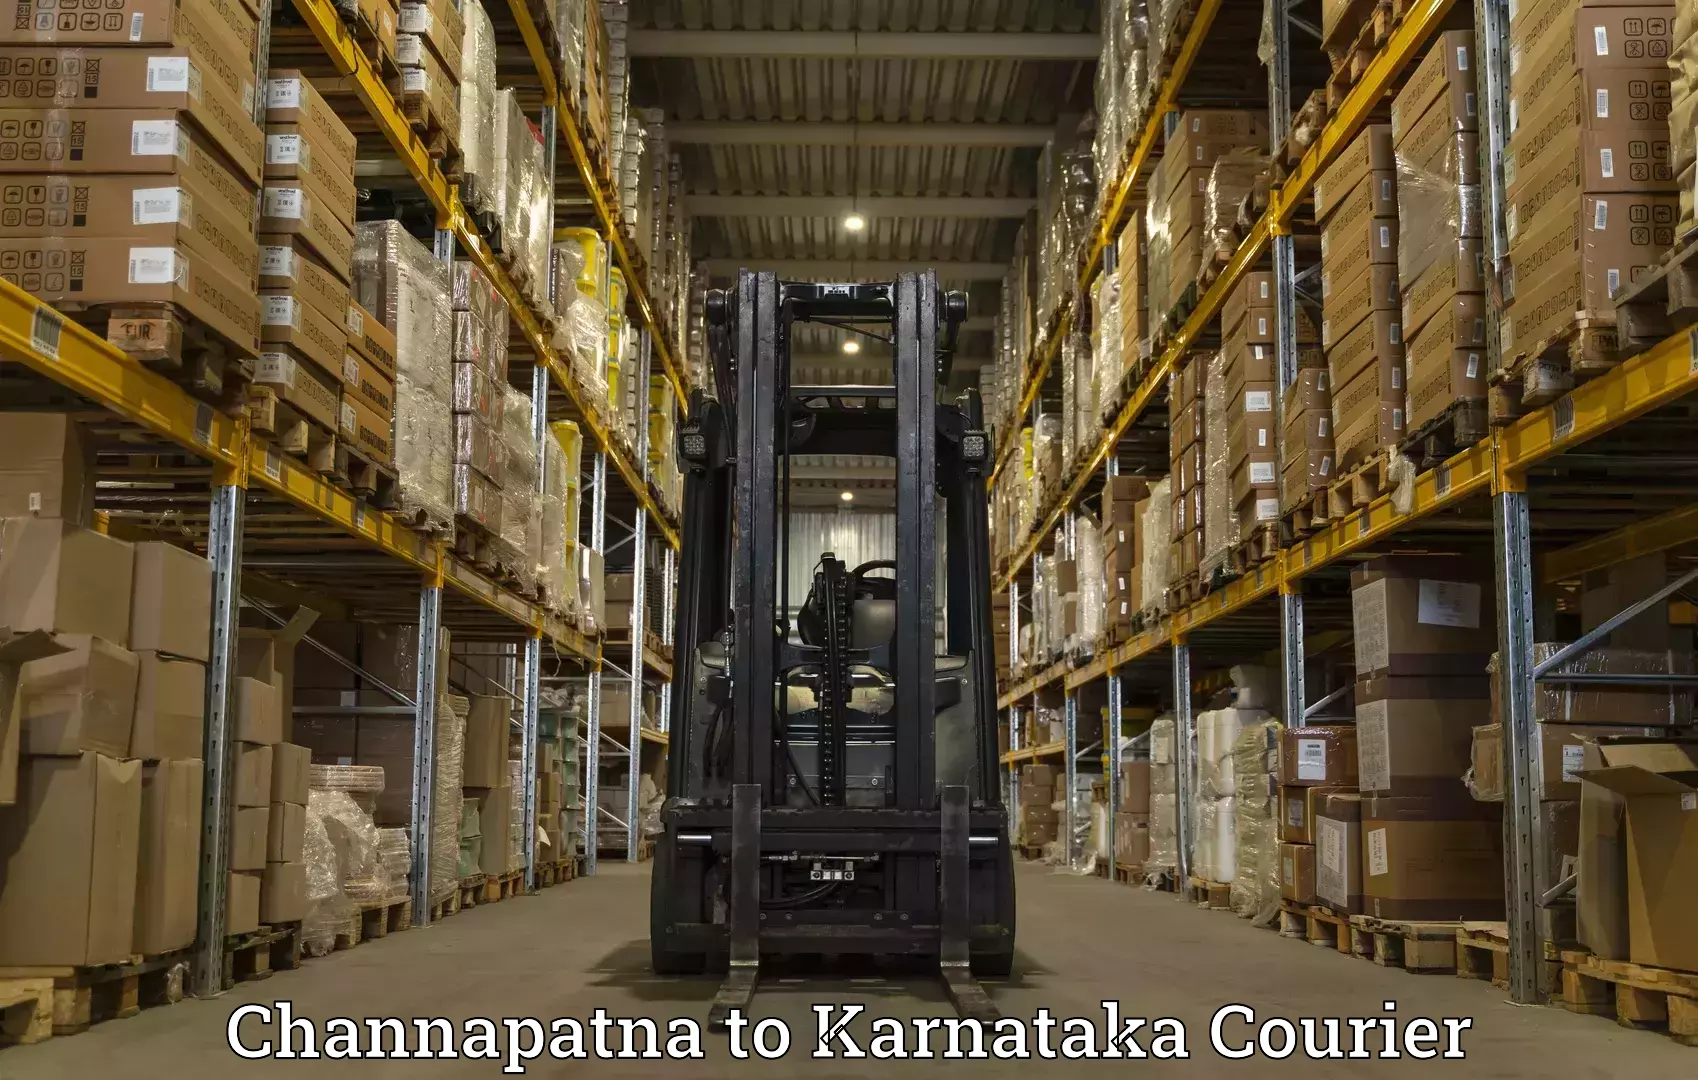 Professional courier services in Channapatna to Chikkamagaluru